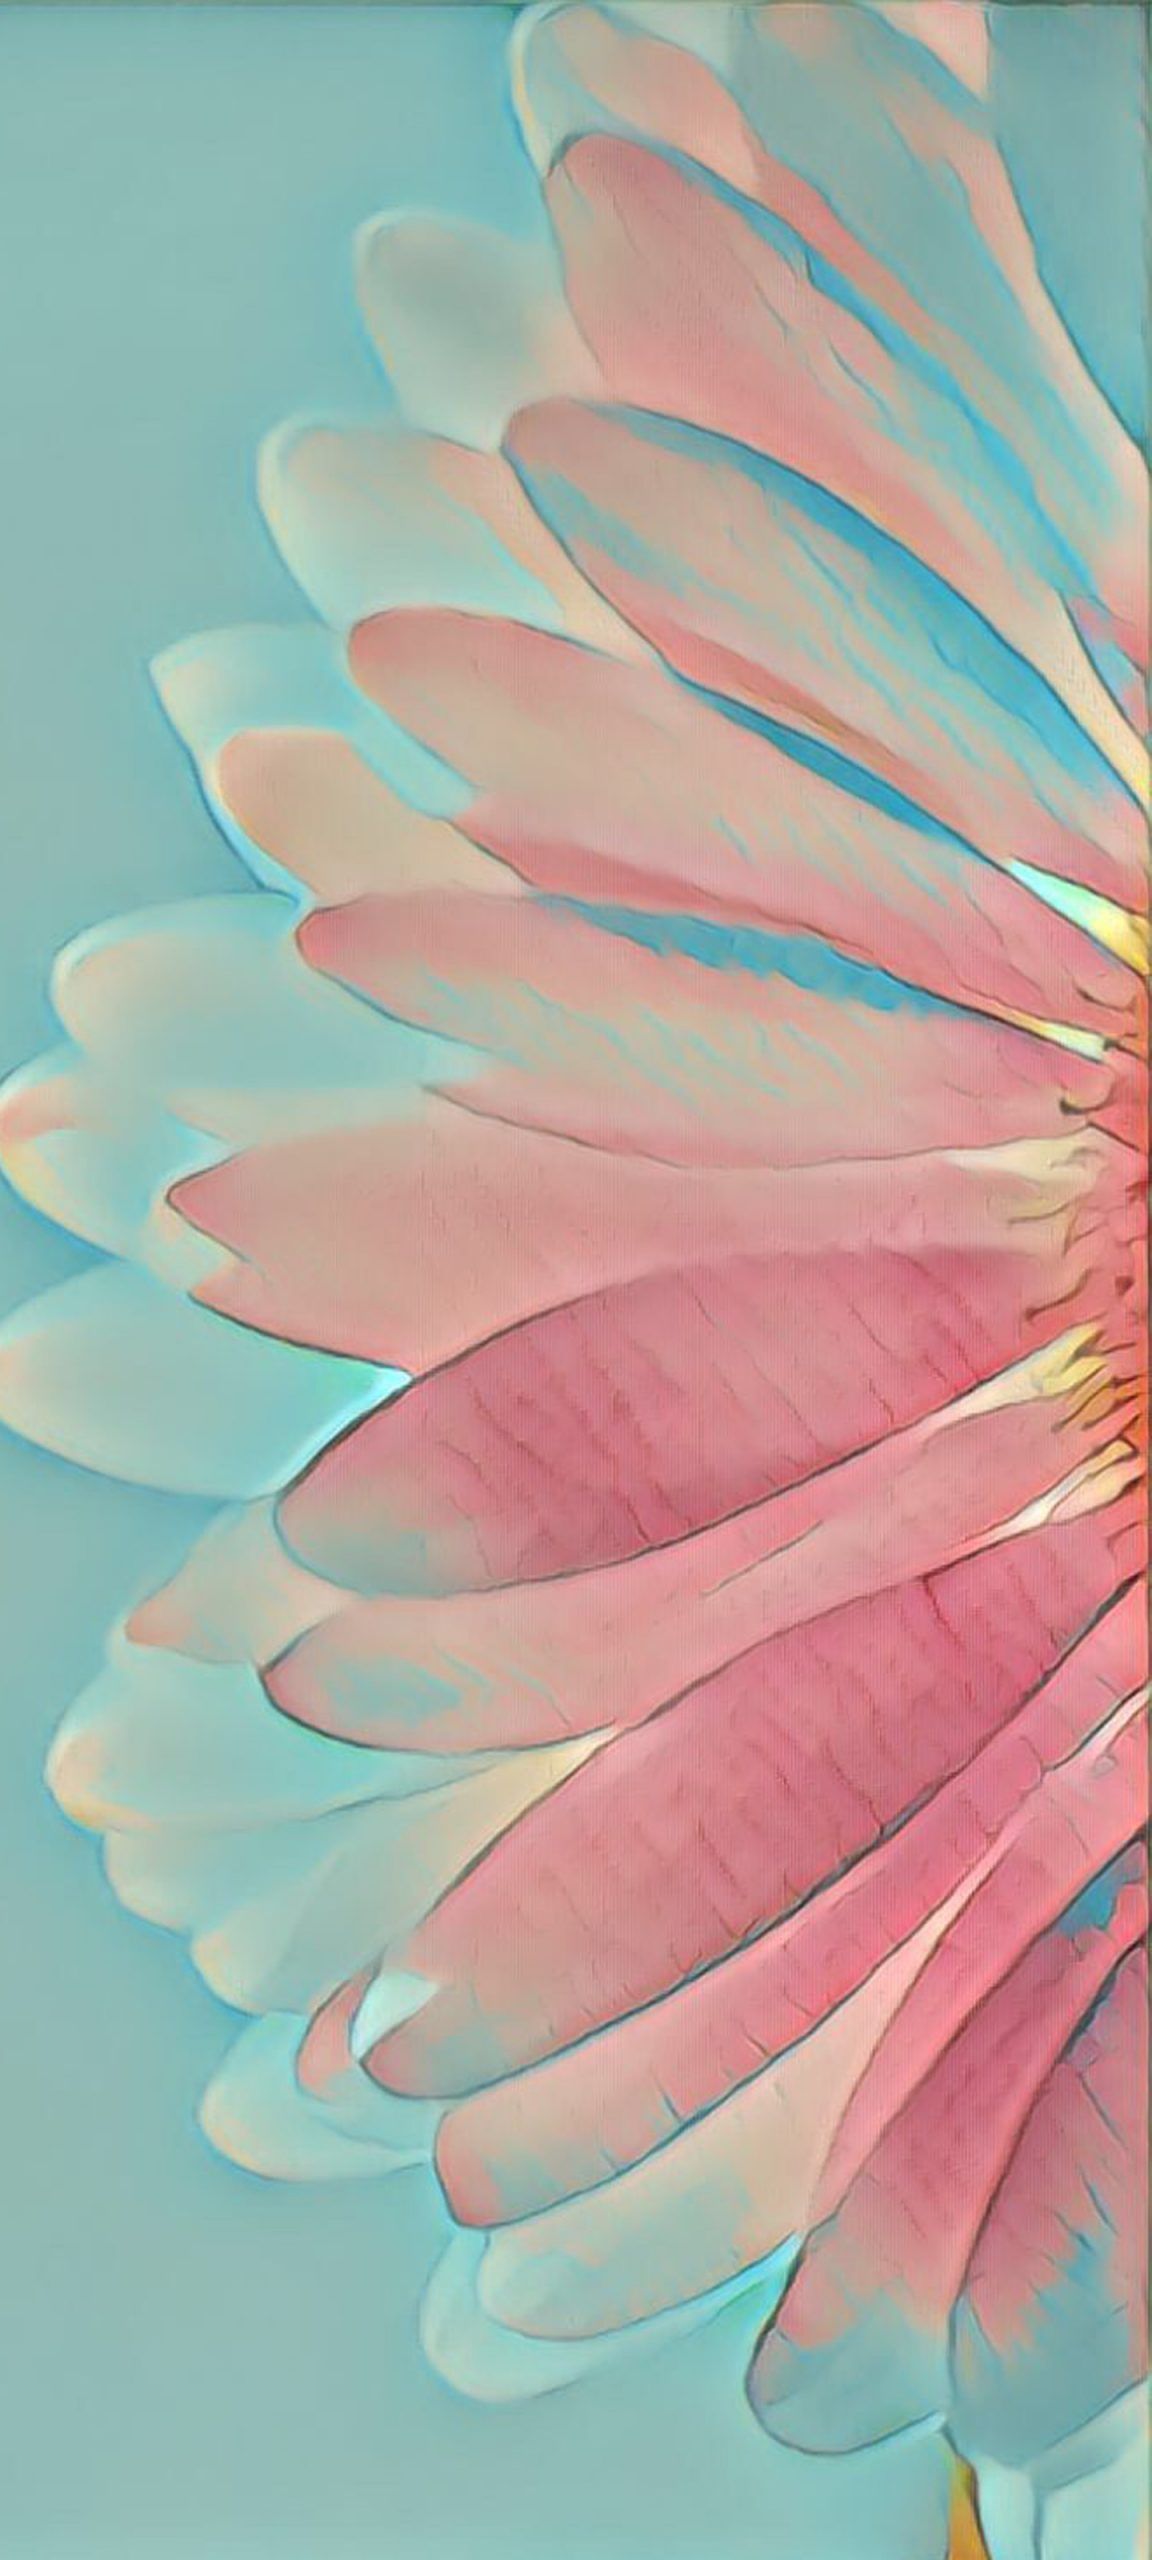 Cool Alternative Wallpaper for Samsung Galaxy S21 Ultra 5G with A Half Side Daisy Flower HD Wallpaper for Laptops and Smartphones